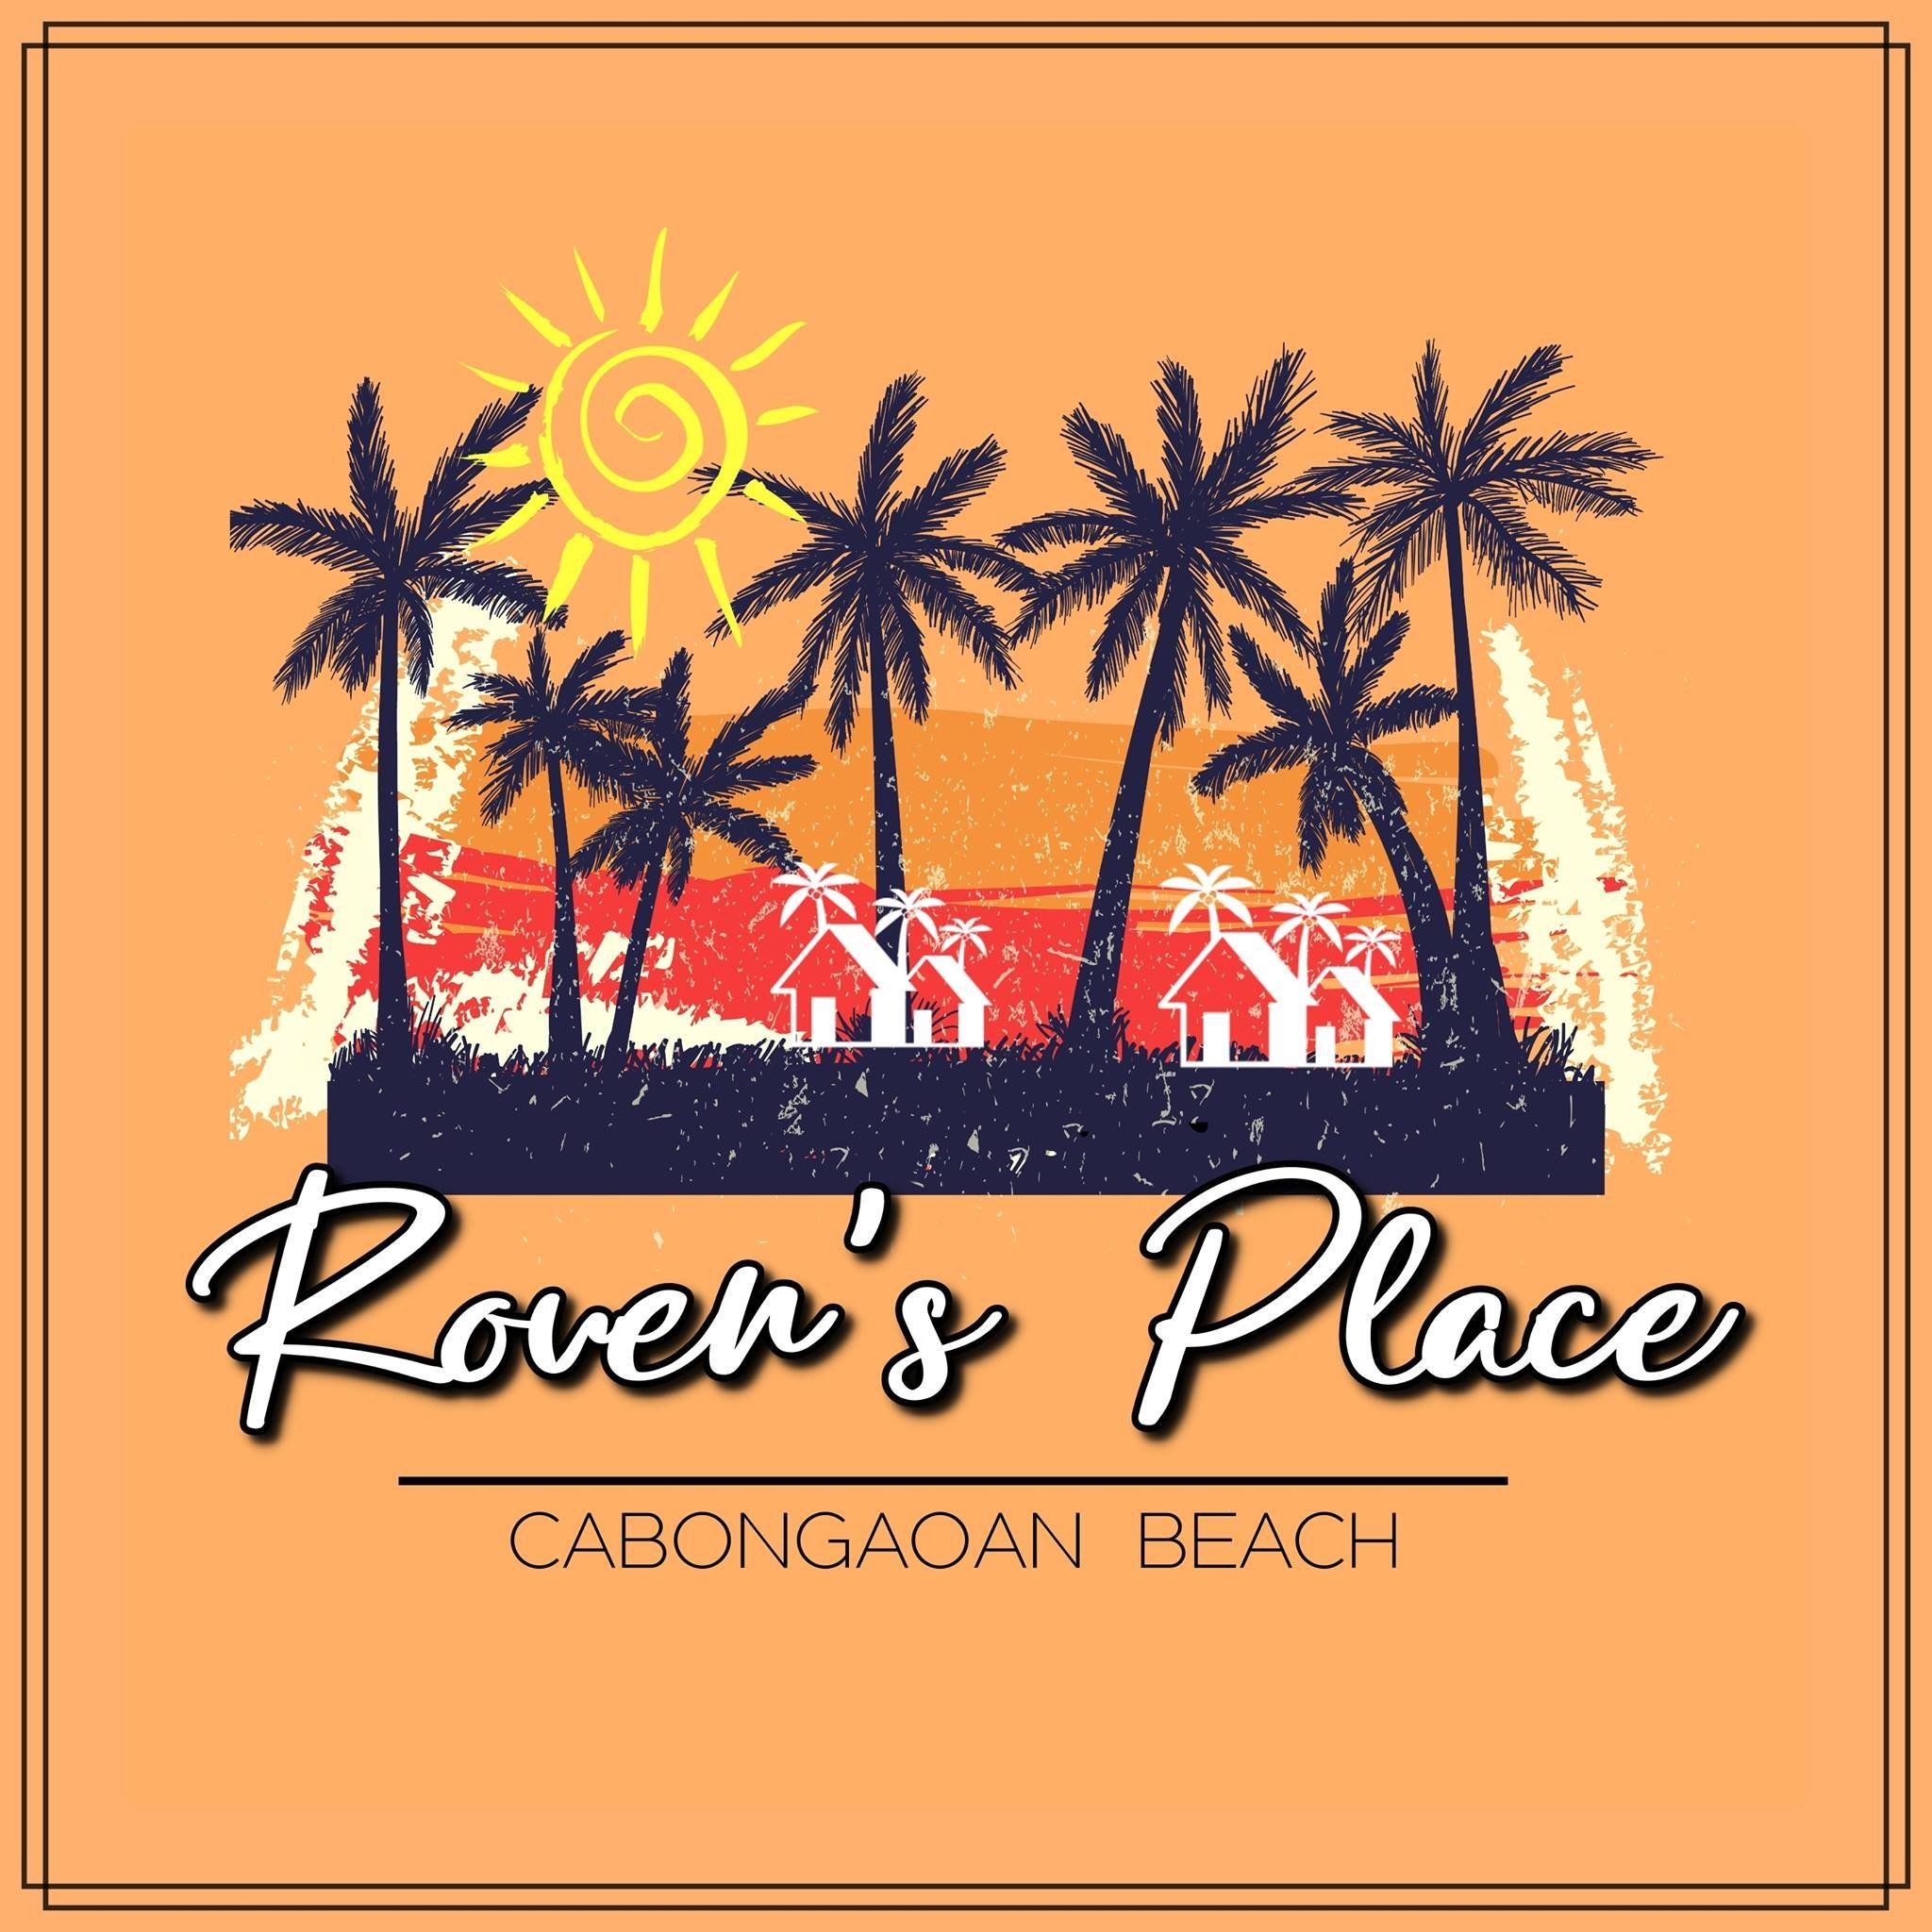 Roven's Place Beach Resort - See Pangasinan